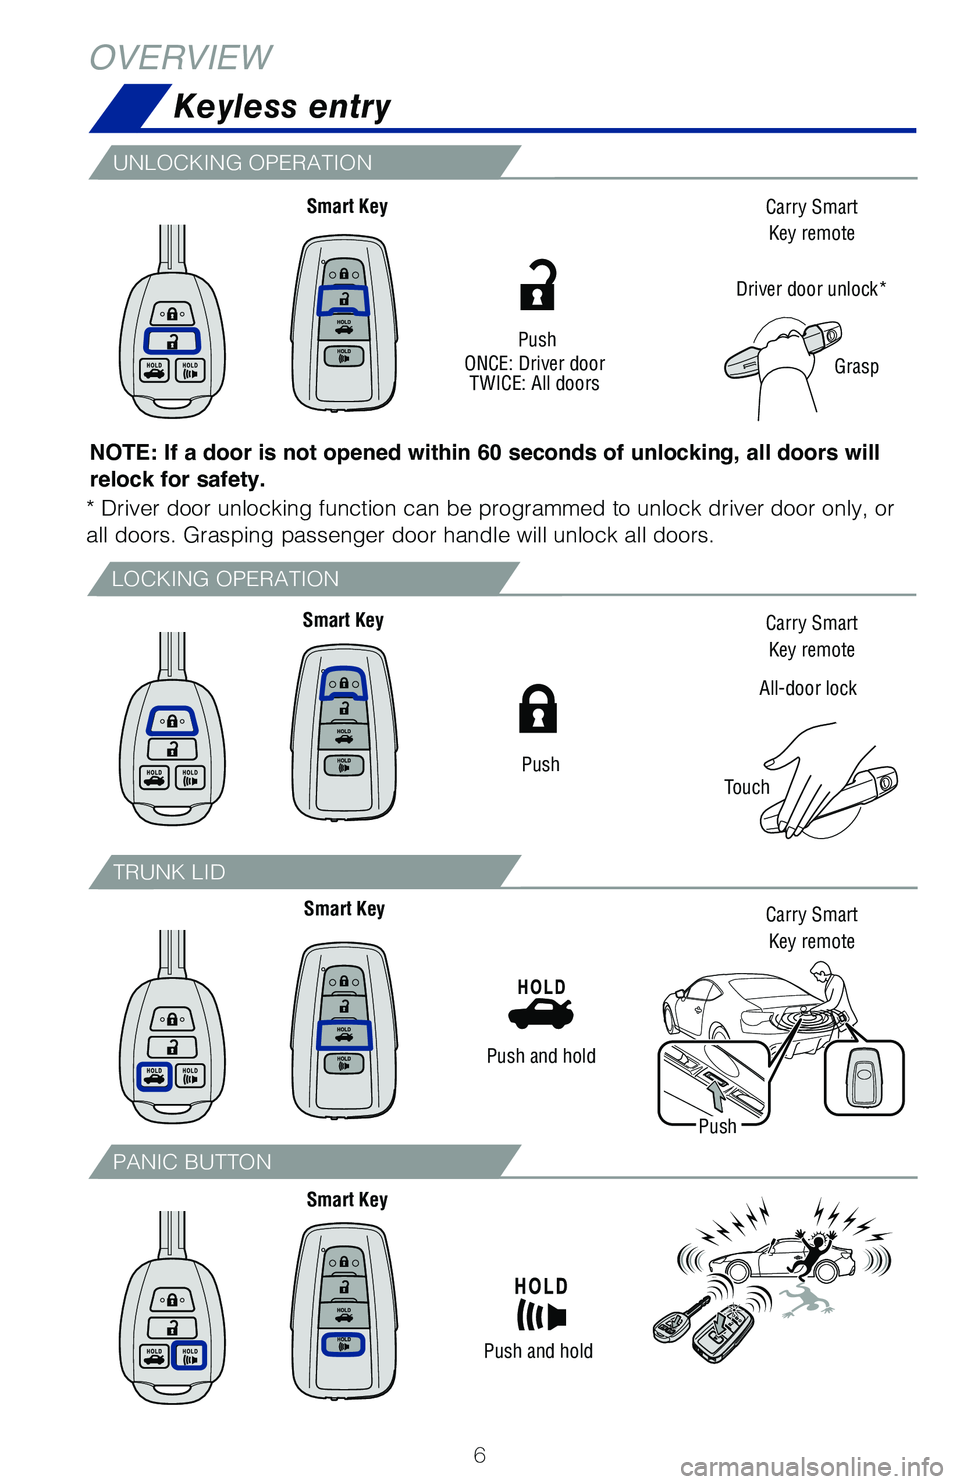 TOYOTA GT86 2020  Owners Manual (in English) 6
Keyless entry
LOCKING OPERATION
UNLOCKING OPERATION
TRUNK LID
PANIC BUTTON
NOTE: If a door is not opened within 60 seconds of unlocking, all doors will 
relock for safety.
All-door lock
Touch
Smart 